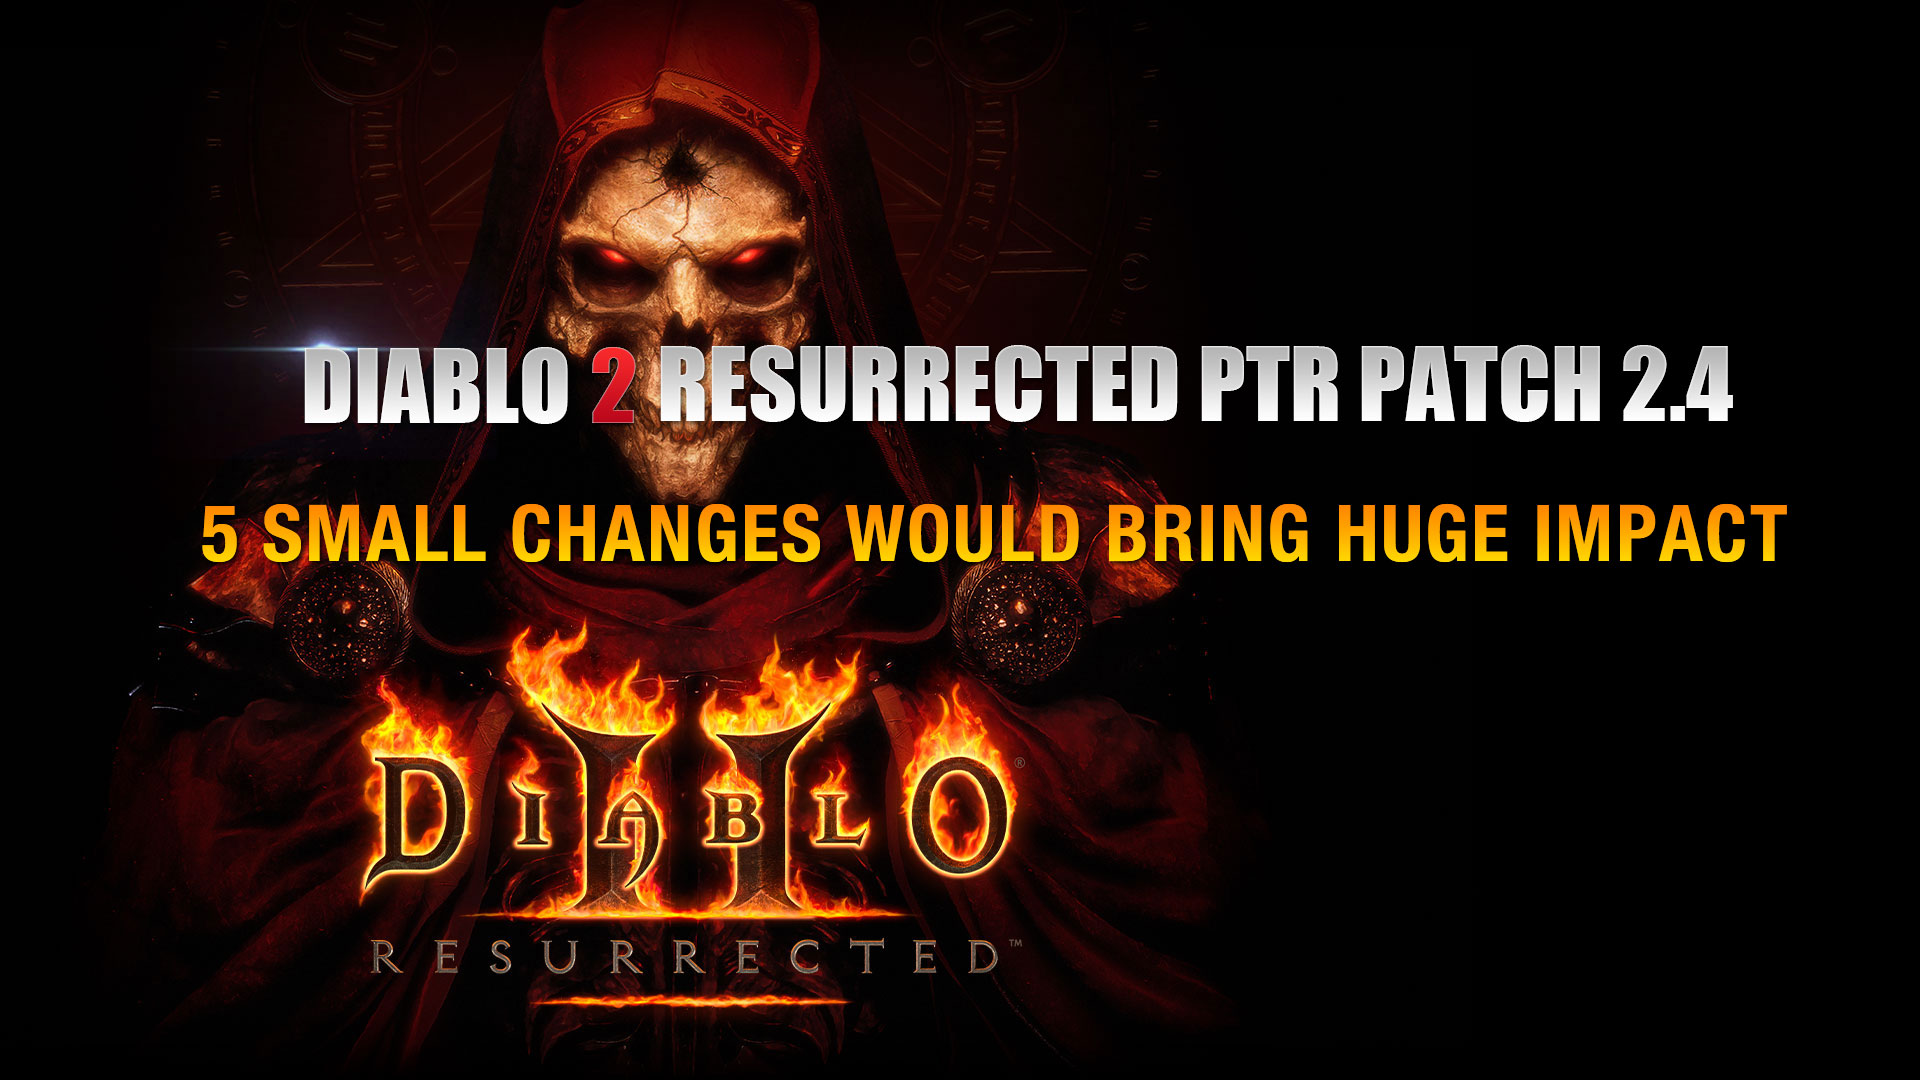 Diablo 2 Resurrected PTR Patch 2.4 - 5 Small Changes Would Bring Huge Impact